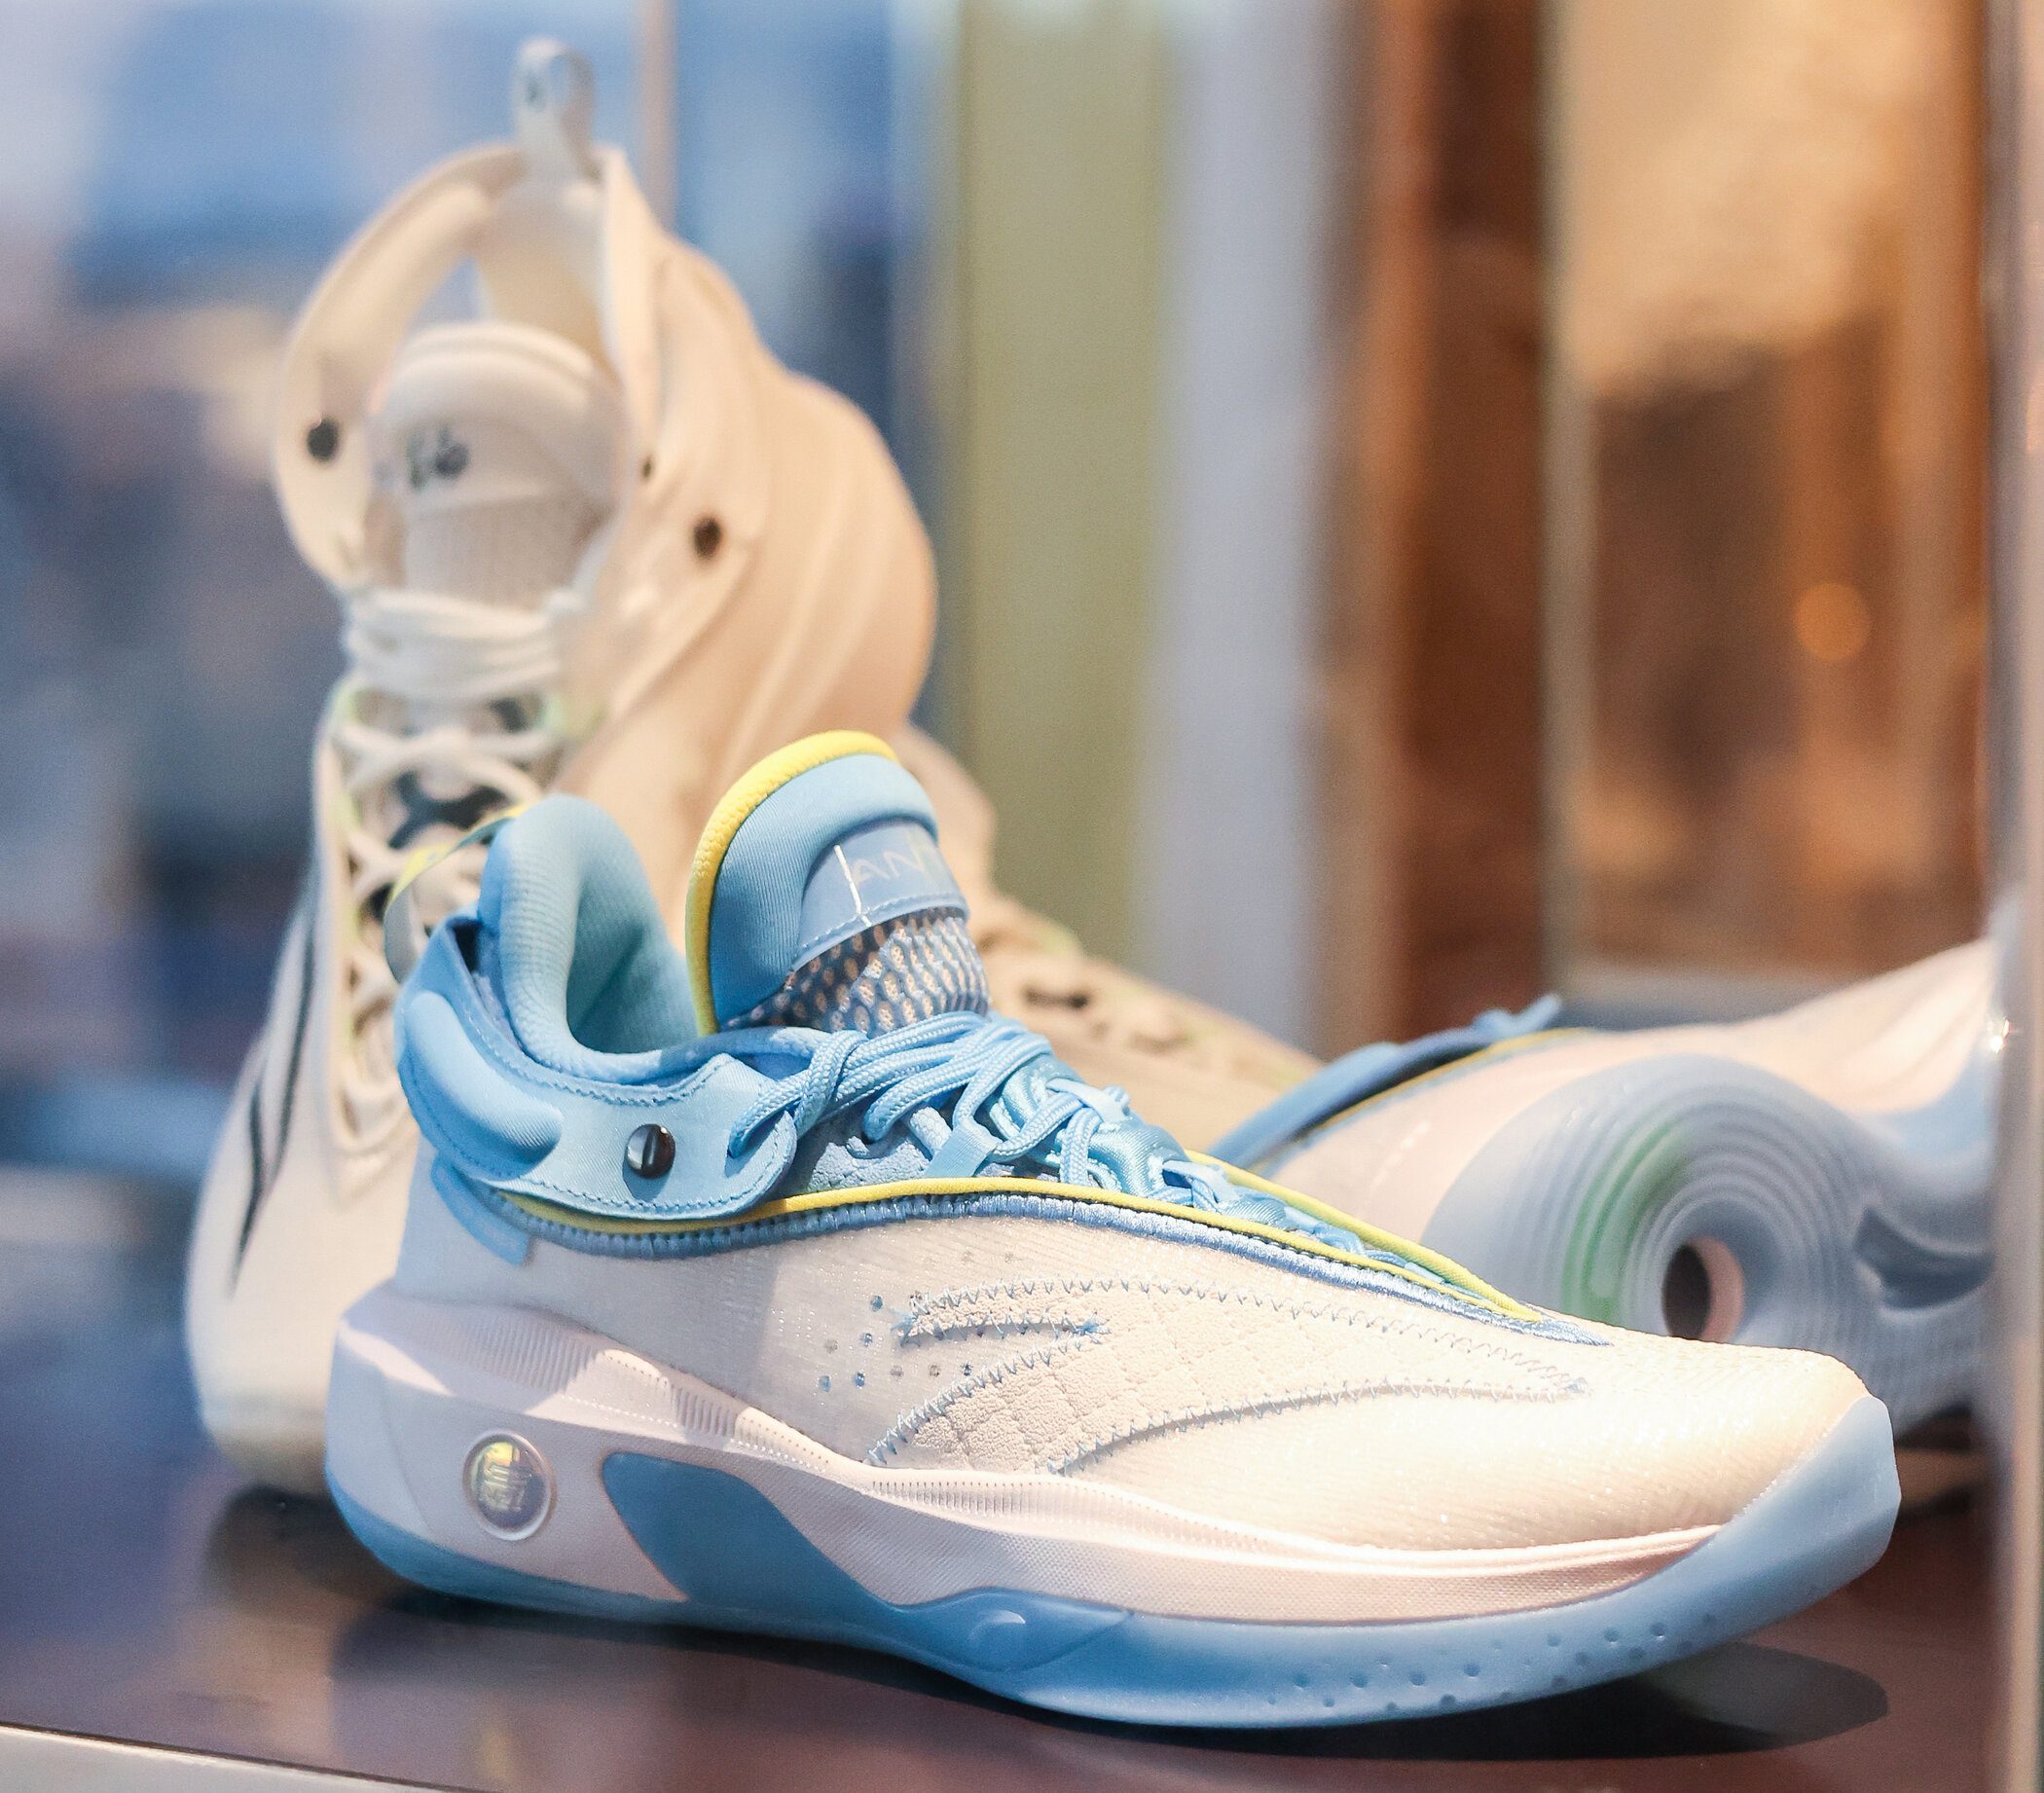 A closer look at Klay Thompson's new signature shoes - CougCenter